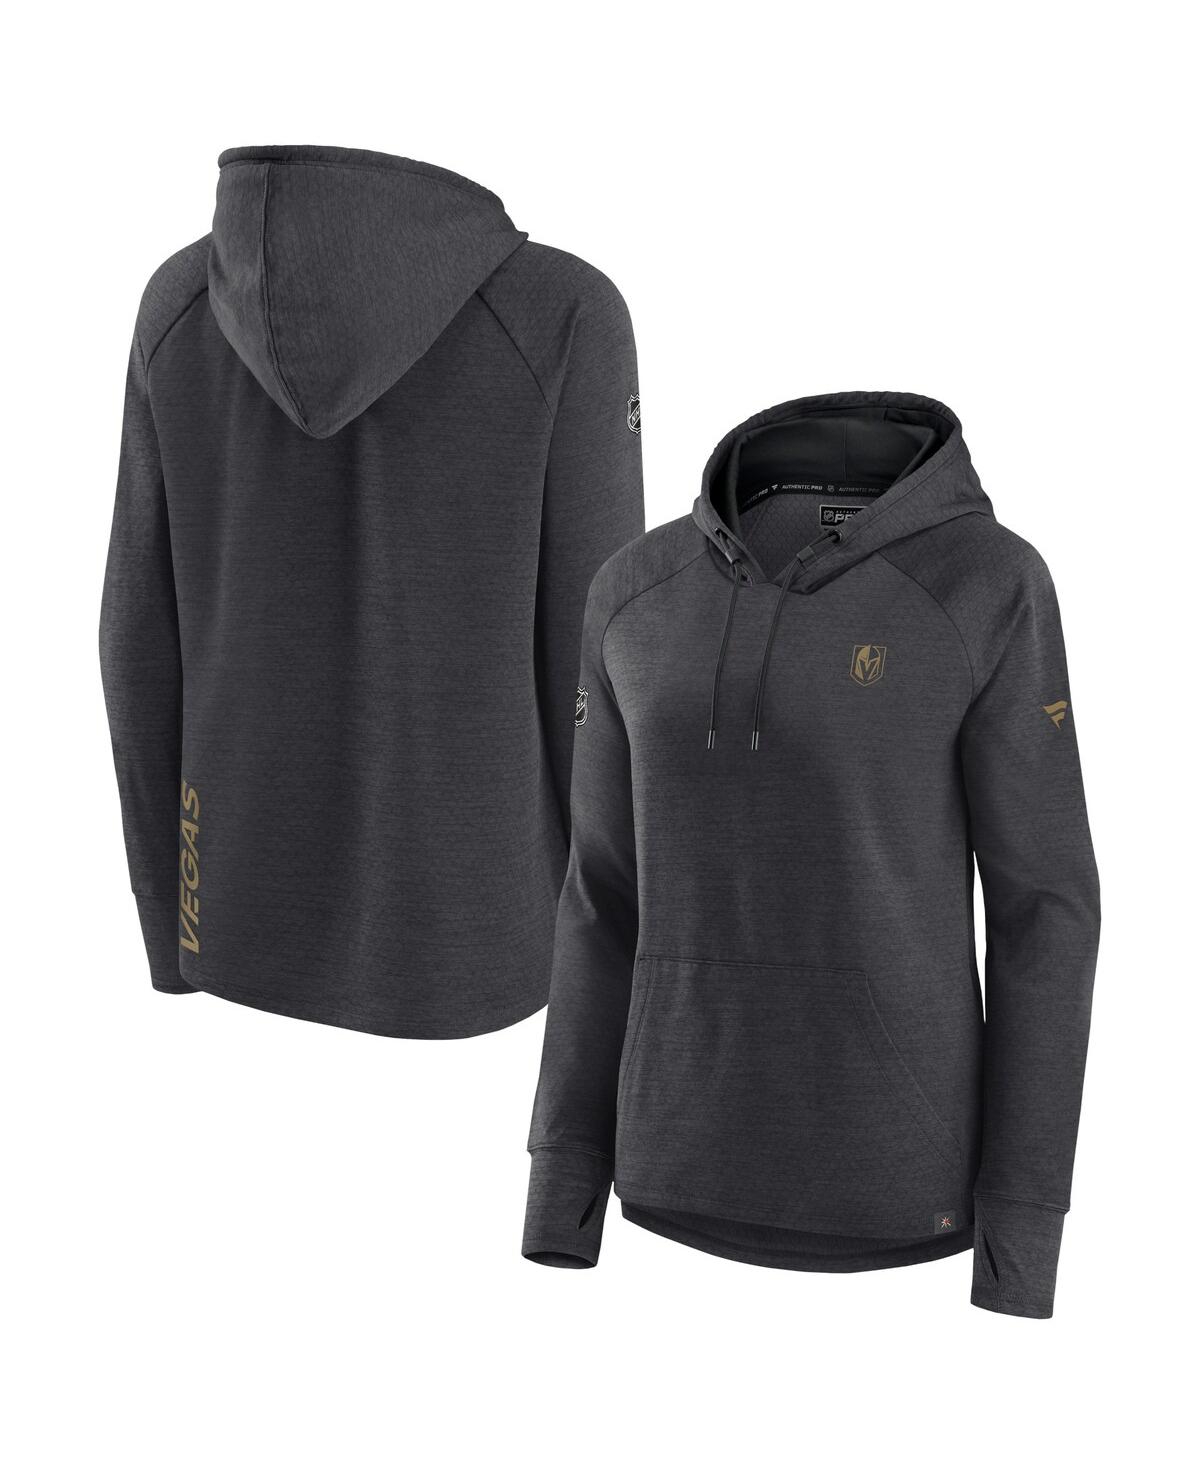 Fanatics Women's  Heather Charcoal Vegas Golden Knights Authentic Pro Pullover Hoodie